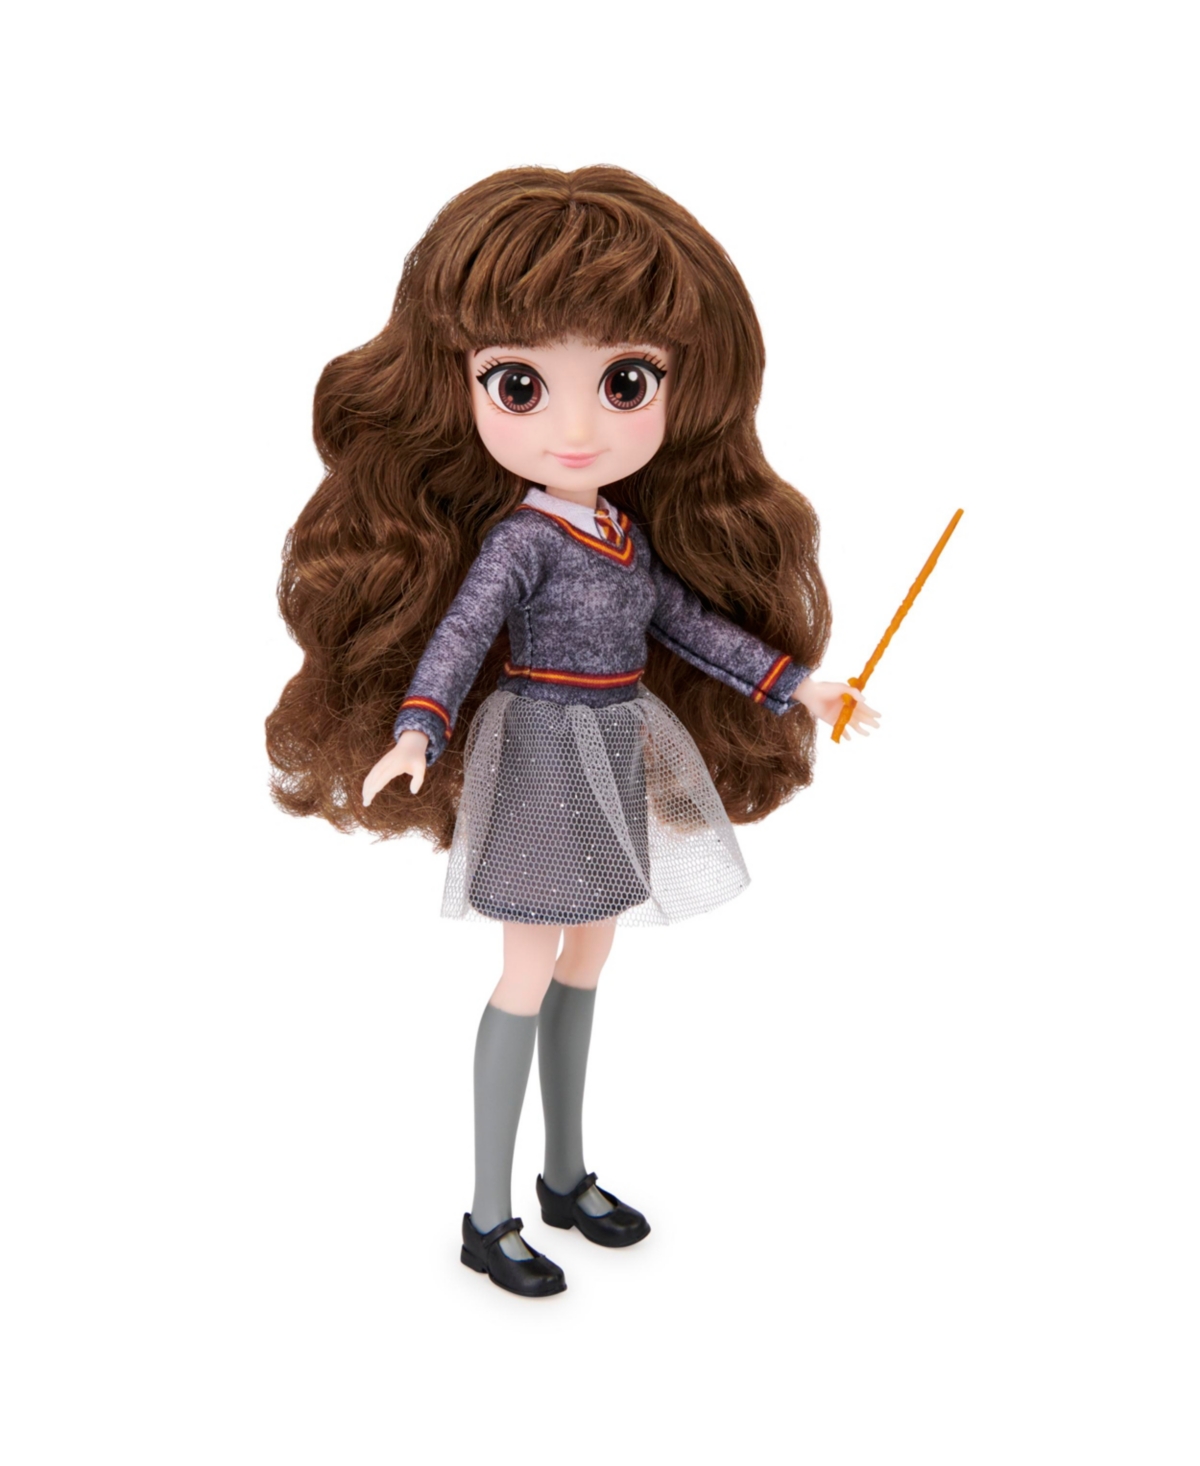 Wizarding World 8in Dolls Hermione In No Color